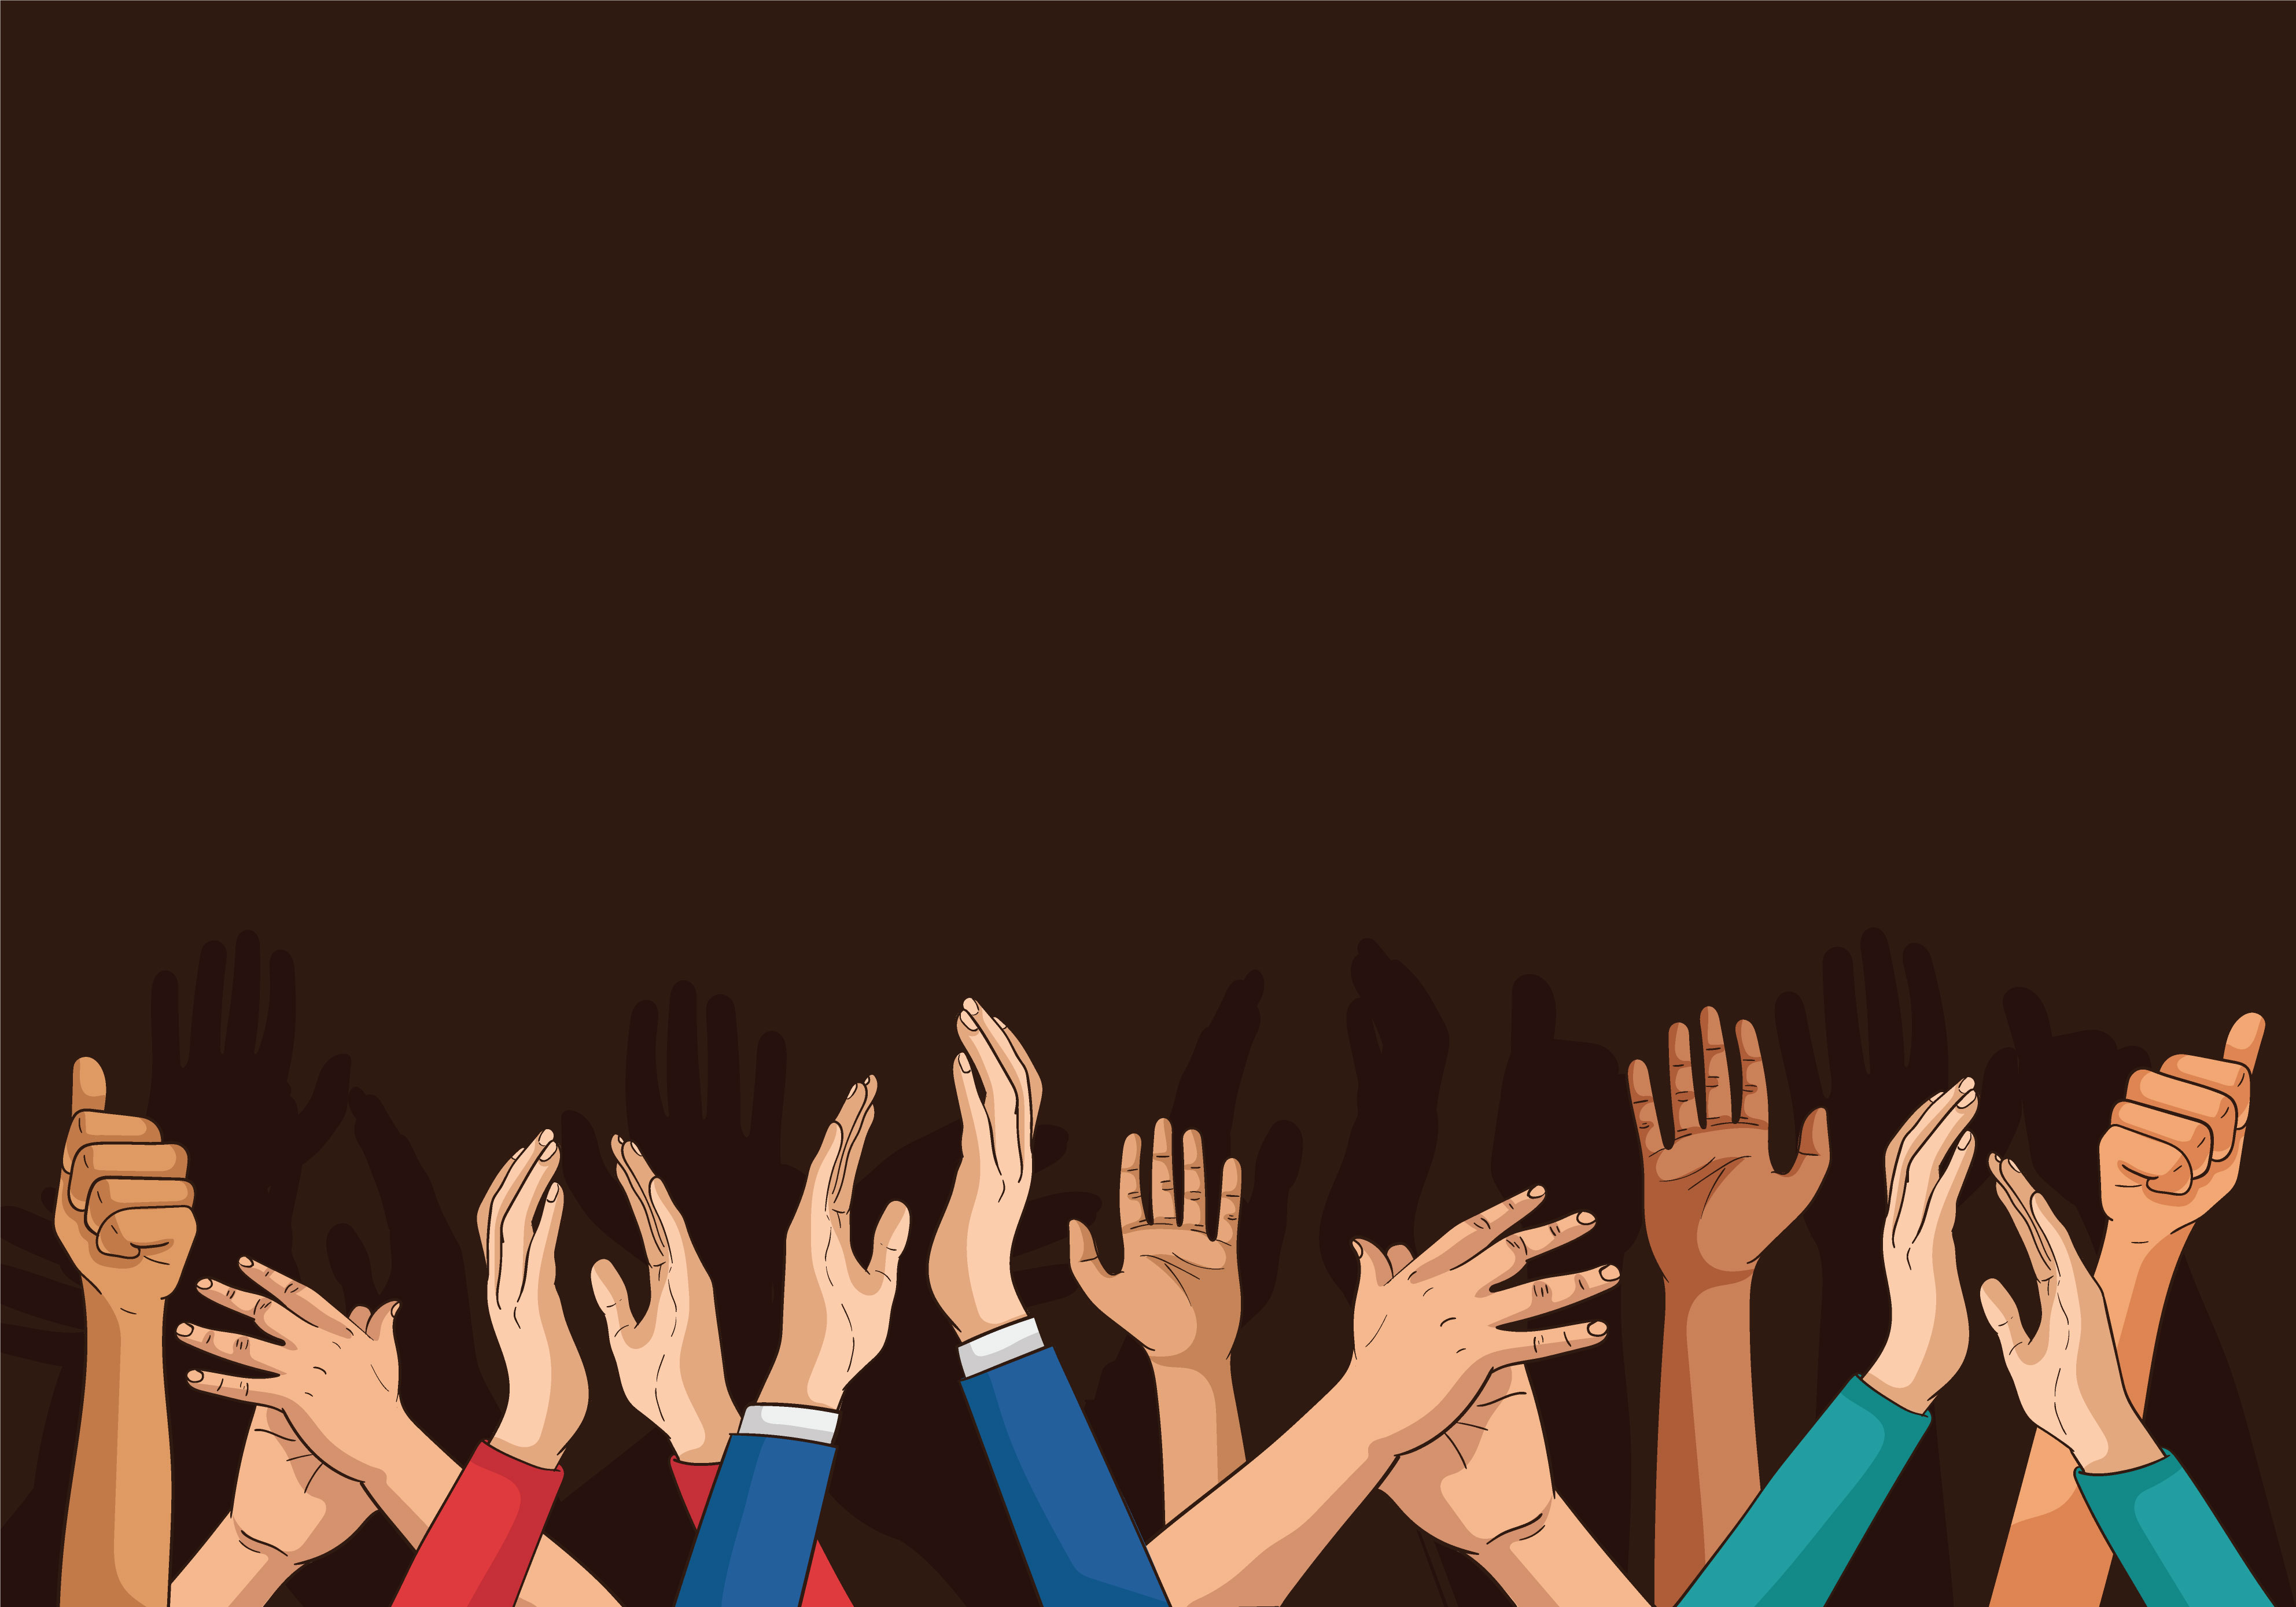 Clapping Hands, Thumbs Up, Applause Illustration.